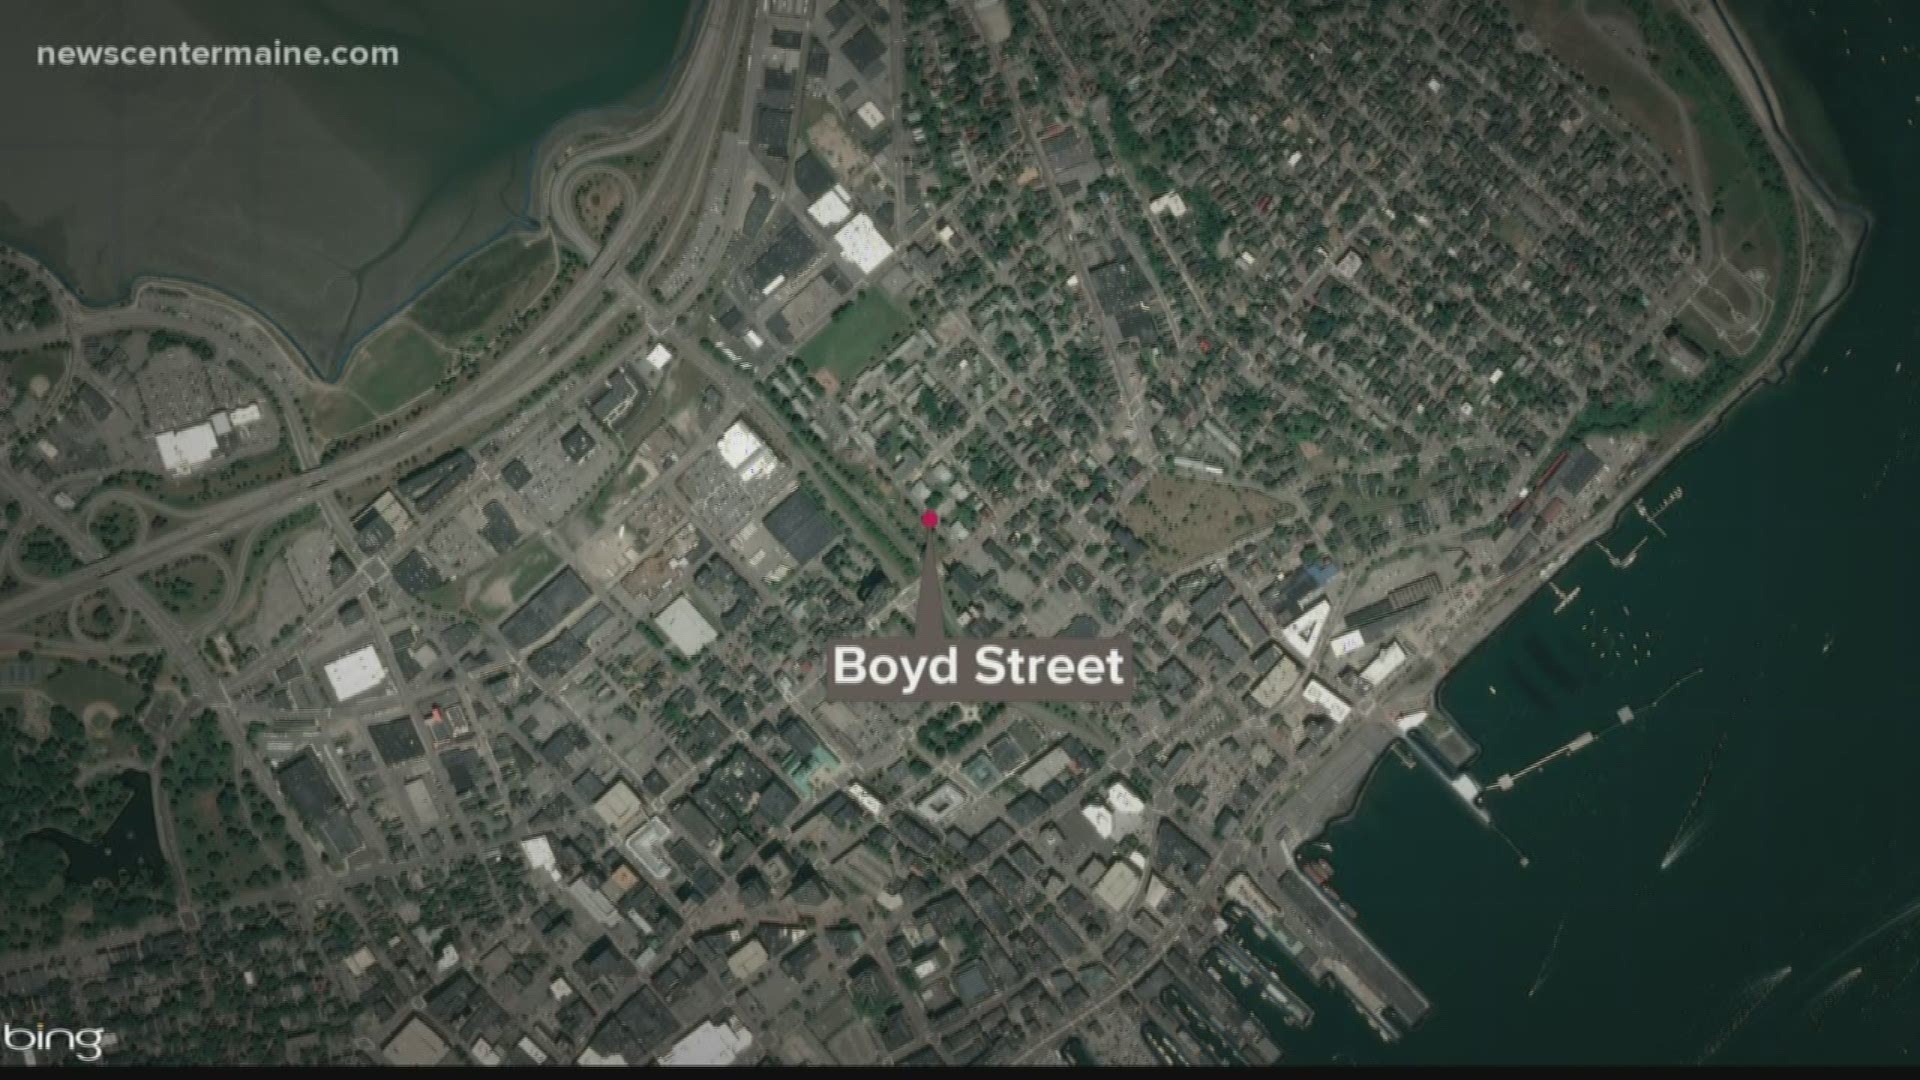 Police have arrested two people in connection with a shooting in Portland. An officer was in the area of Boyd Street when he heard gunfire and was able to respond.